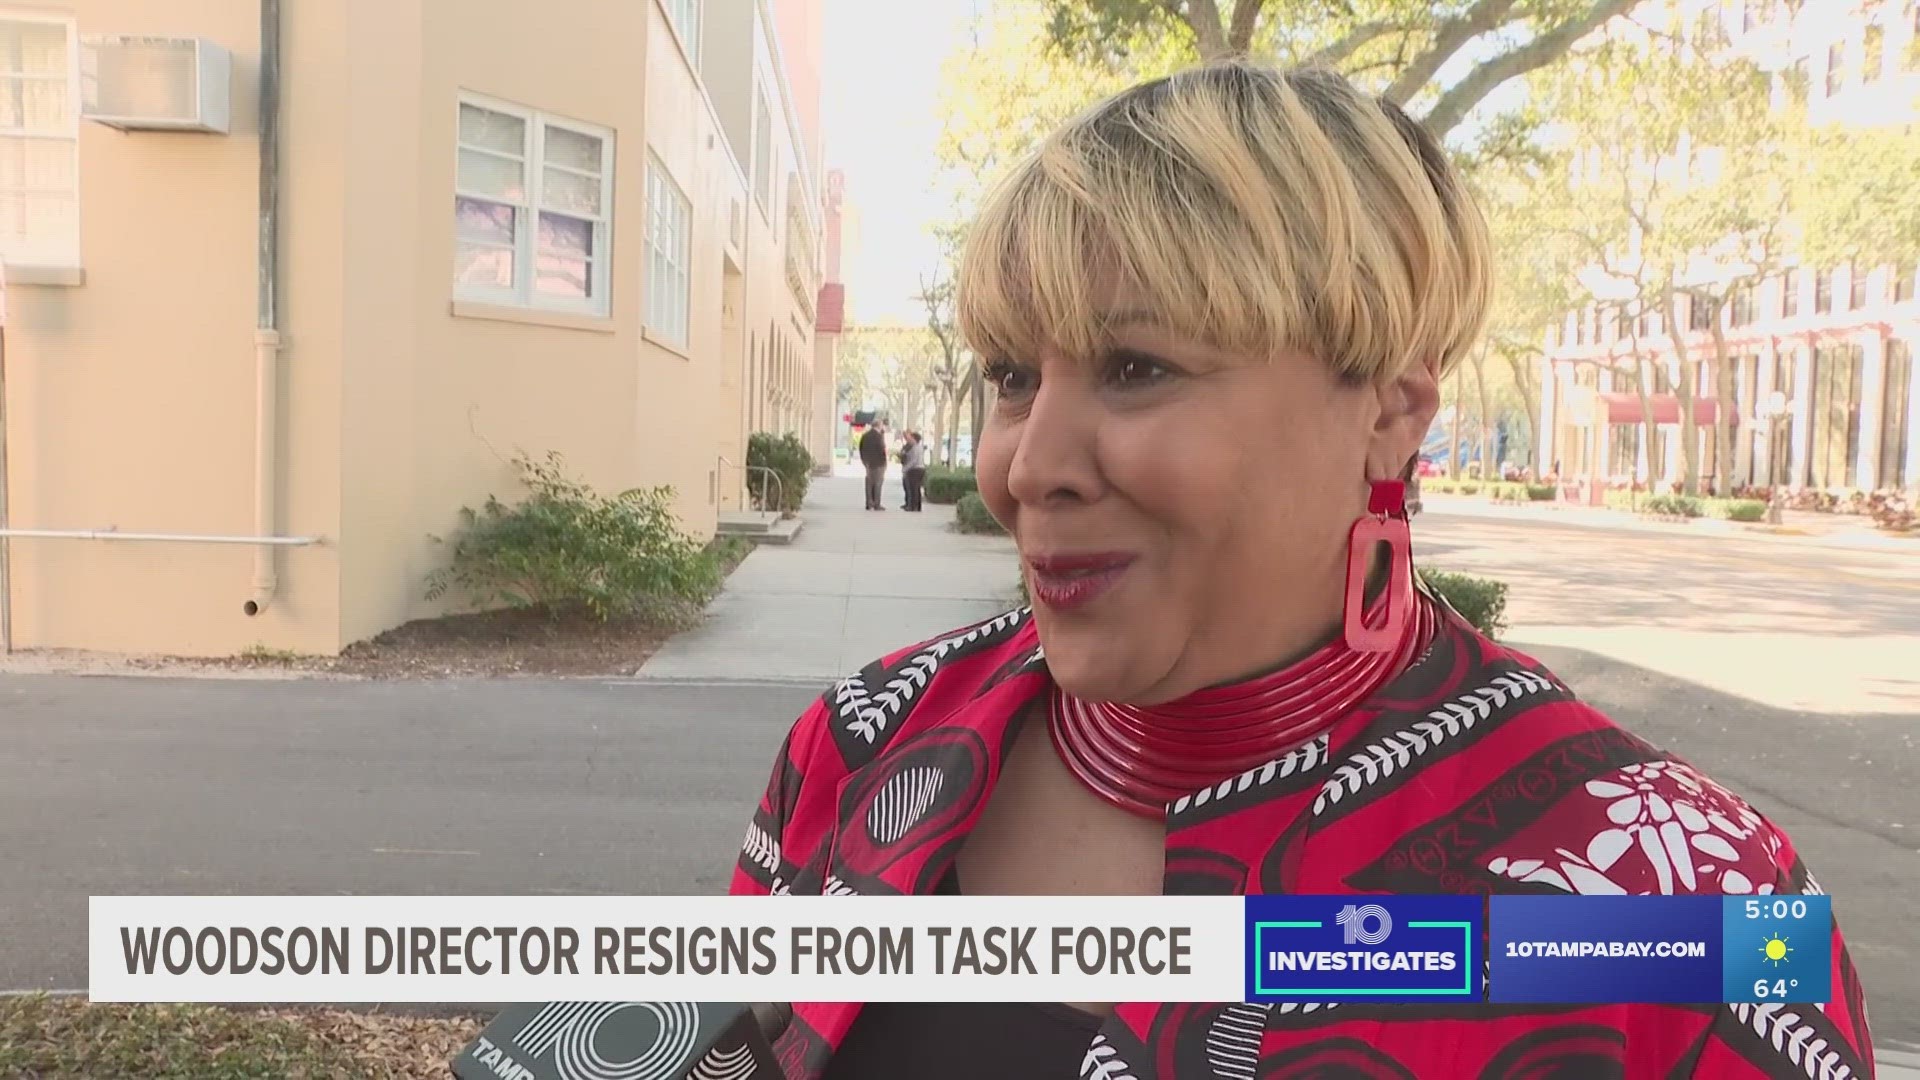 Terri Lipsey Scott, director of St. Pete’s Woodson Museum, confirmed her resignation from a new state task force due to a possible conflict of interest.